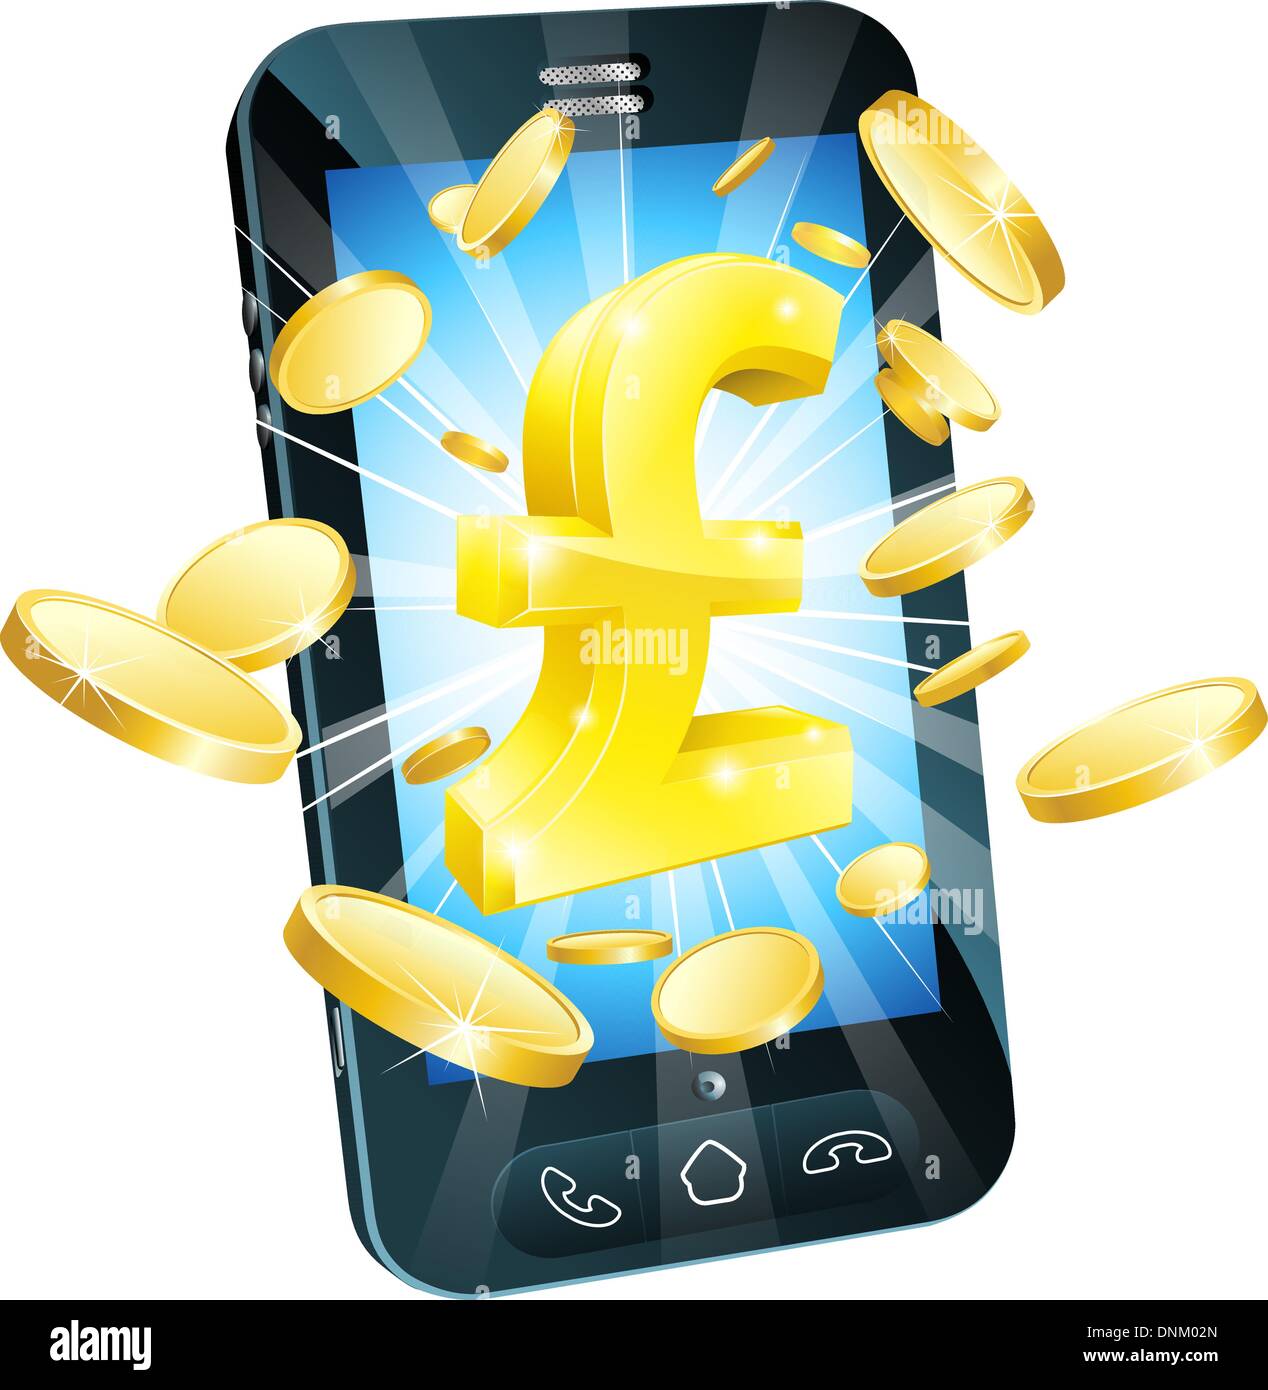 Pound money phone concept illustration of mobile cell phone with gold Pound sign and coins Stock Vector